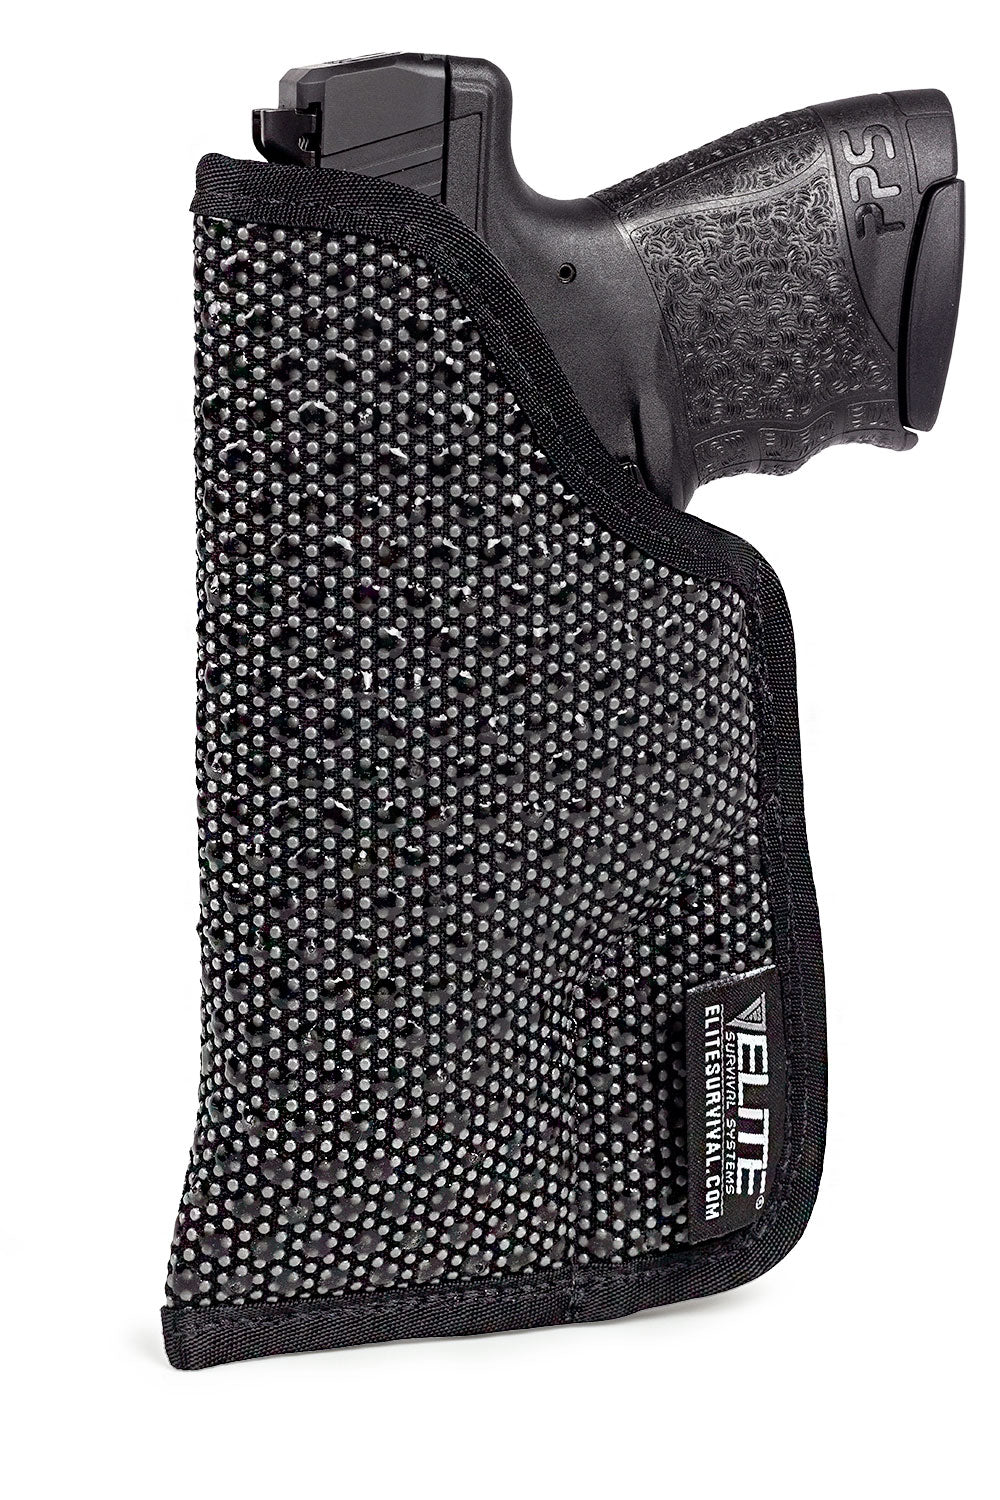 Mainstay holster with sticky, silicone covered surface -shown with Walther PPS.